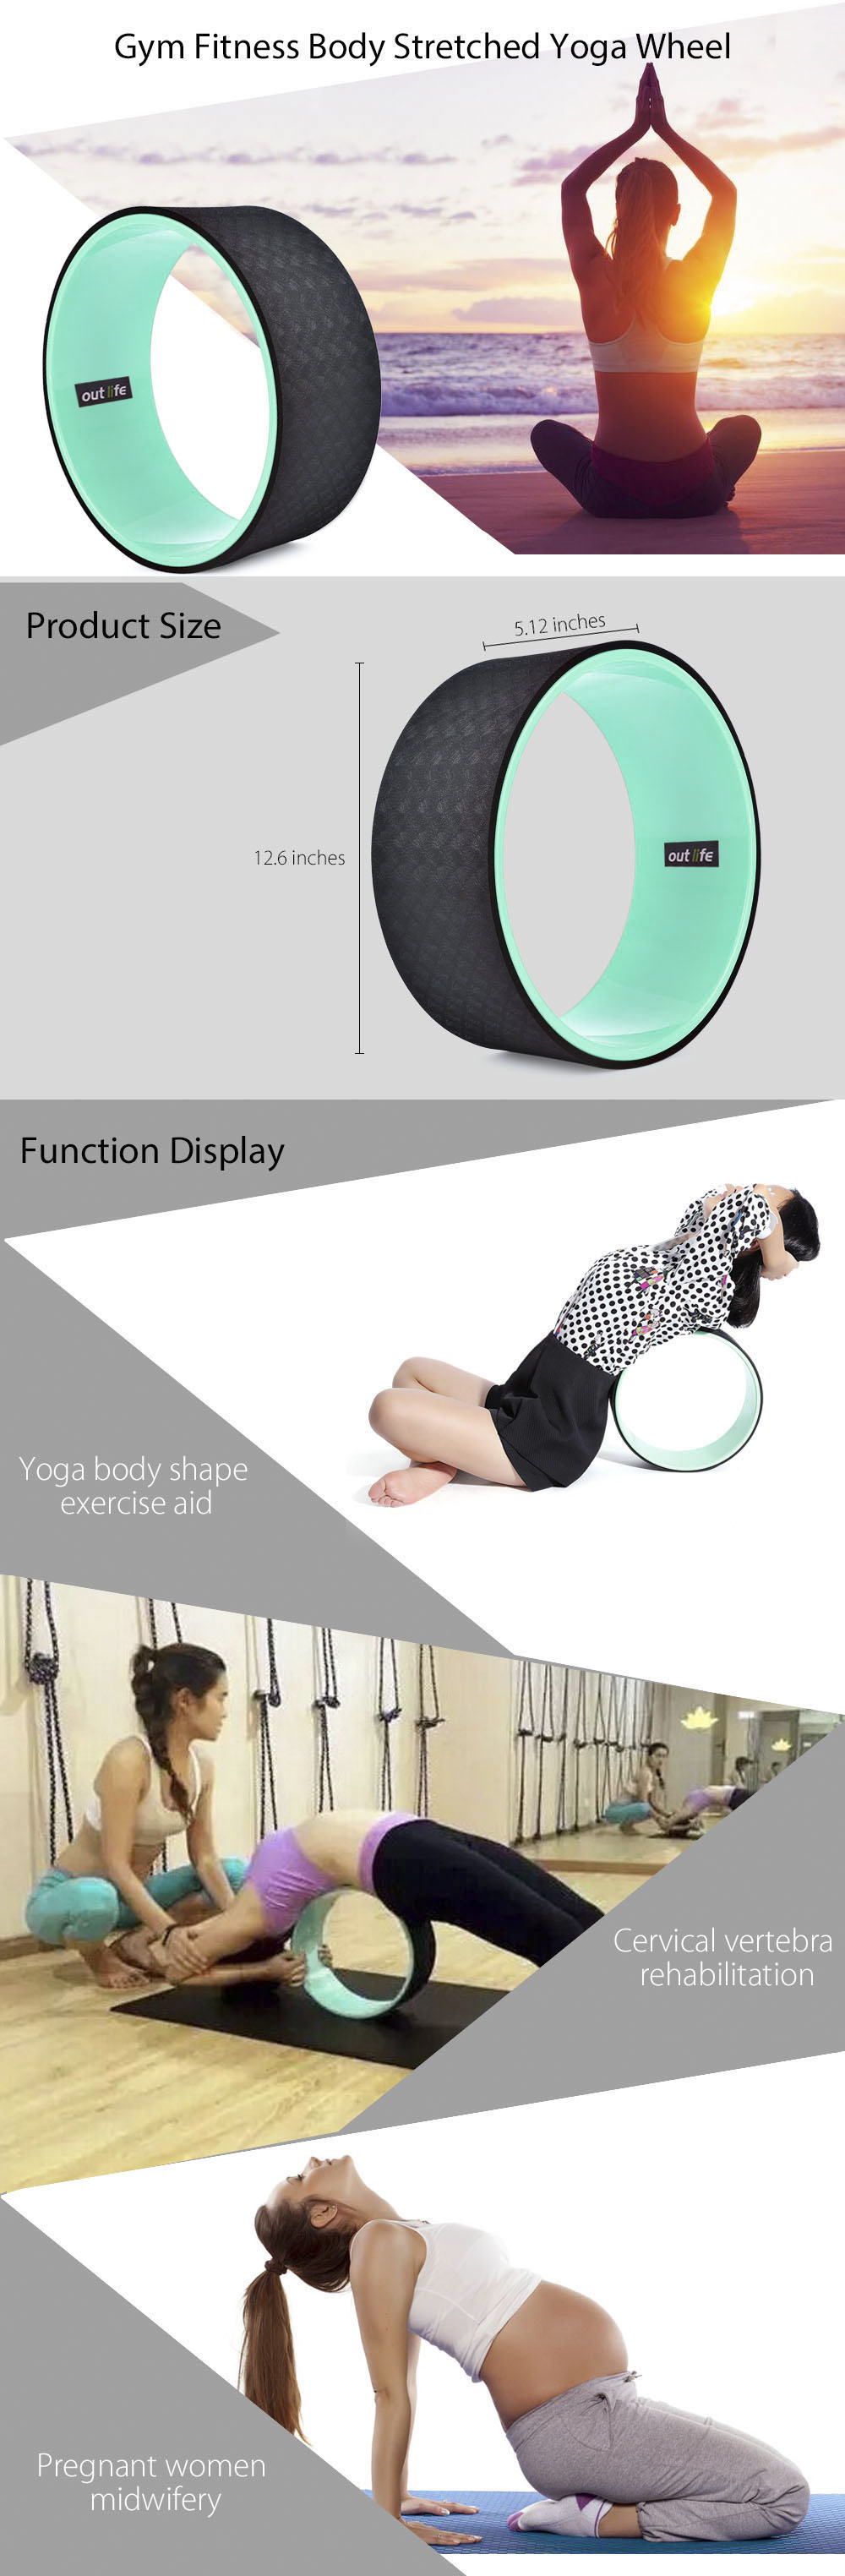 Outlife Gym Fitness Stretched Yoga Wheel for Waist Shape Bodybuilding Workout Equipment